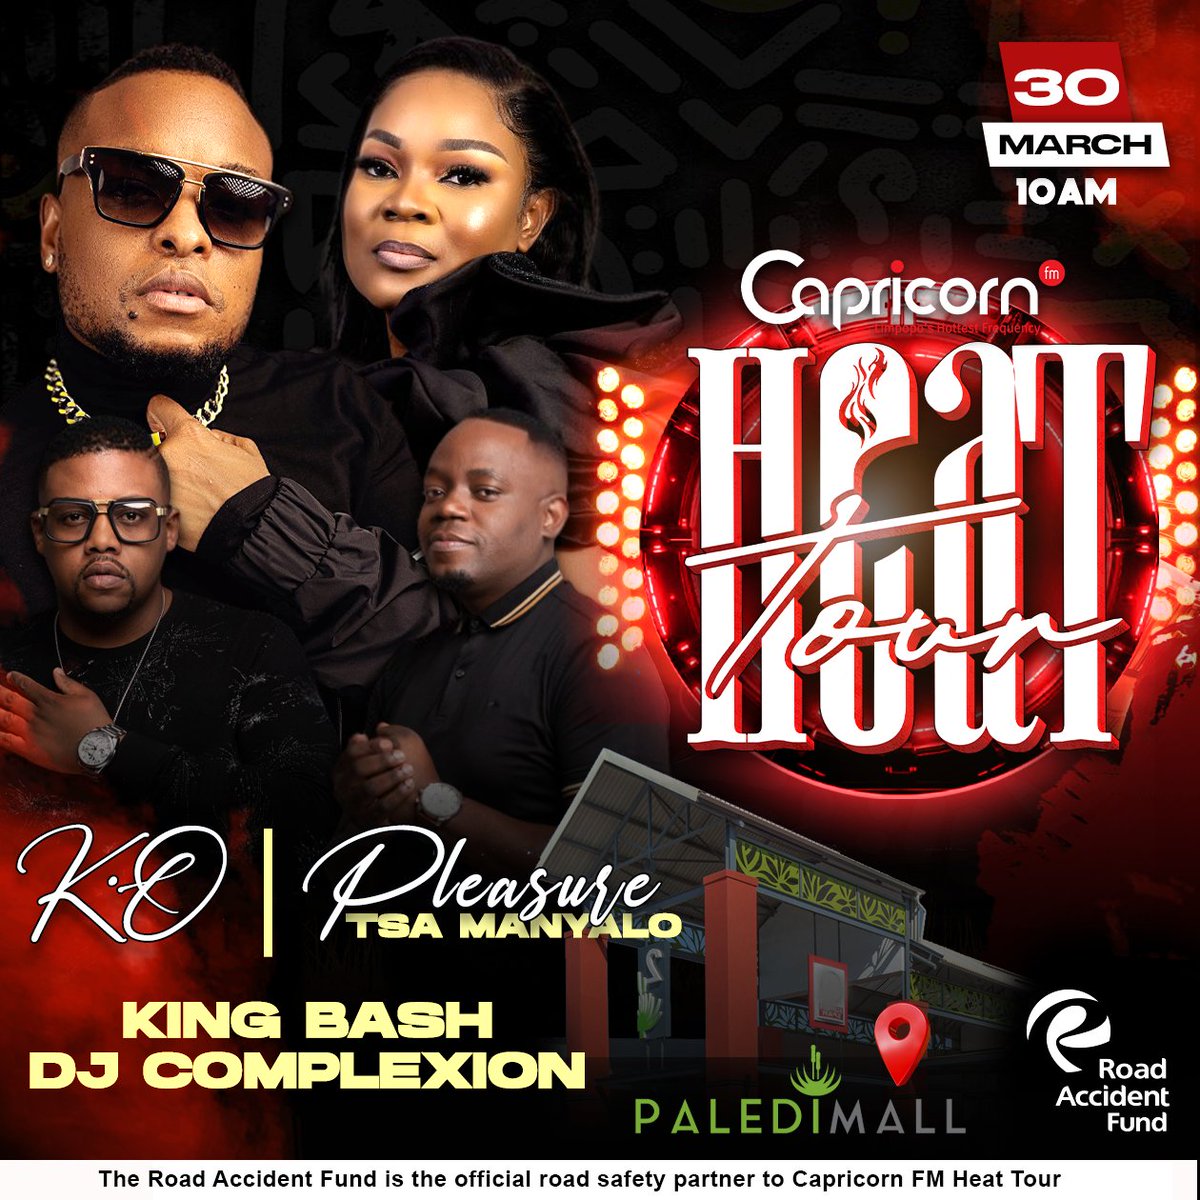 Do not miss out on the #CapricornFMHeatTour stop at Paledi Mall in Mankweng this Saturday! Catch 🔥 performances by @MrCashtime, @PleasurePeta, @KingBash_Ent and @DjComplexion. #SafeRoadsSecureFutures | @RAF_SA is the official road safety partner to the Capricorn FM Heat Tour.